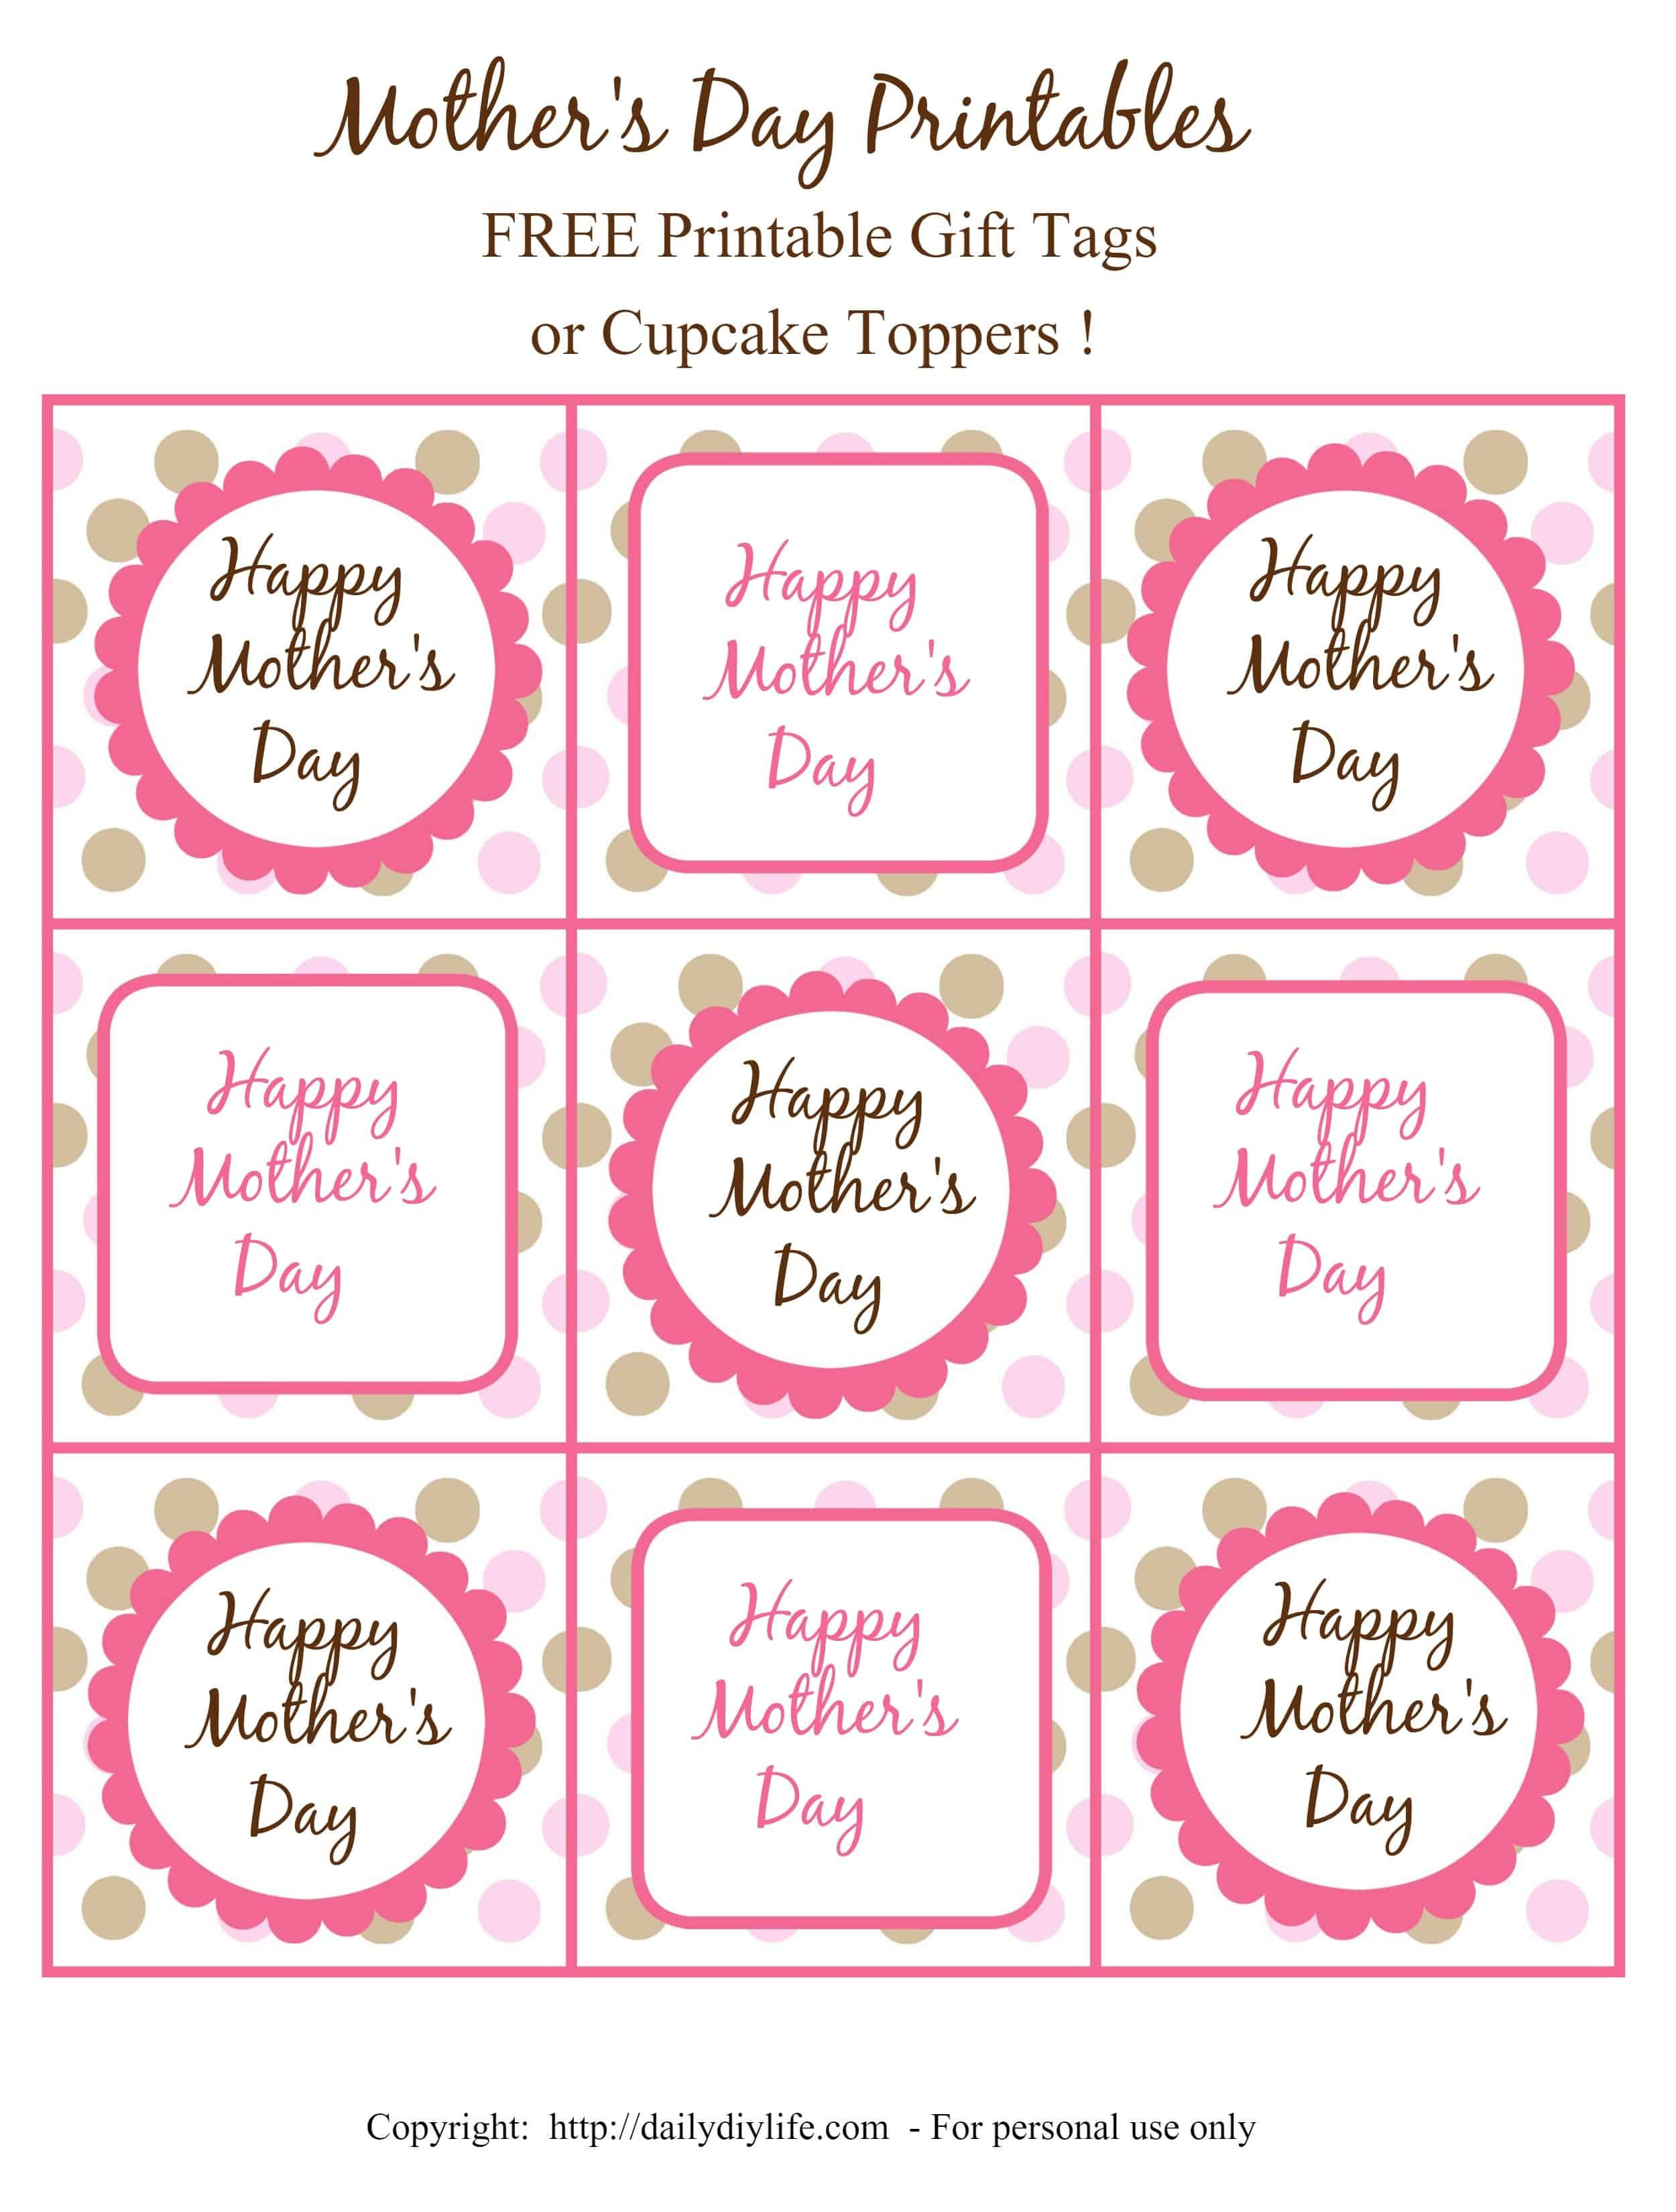 Mother s Day FREE Printable Gift Tags or Cupcake Toppers